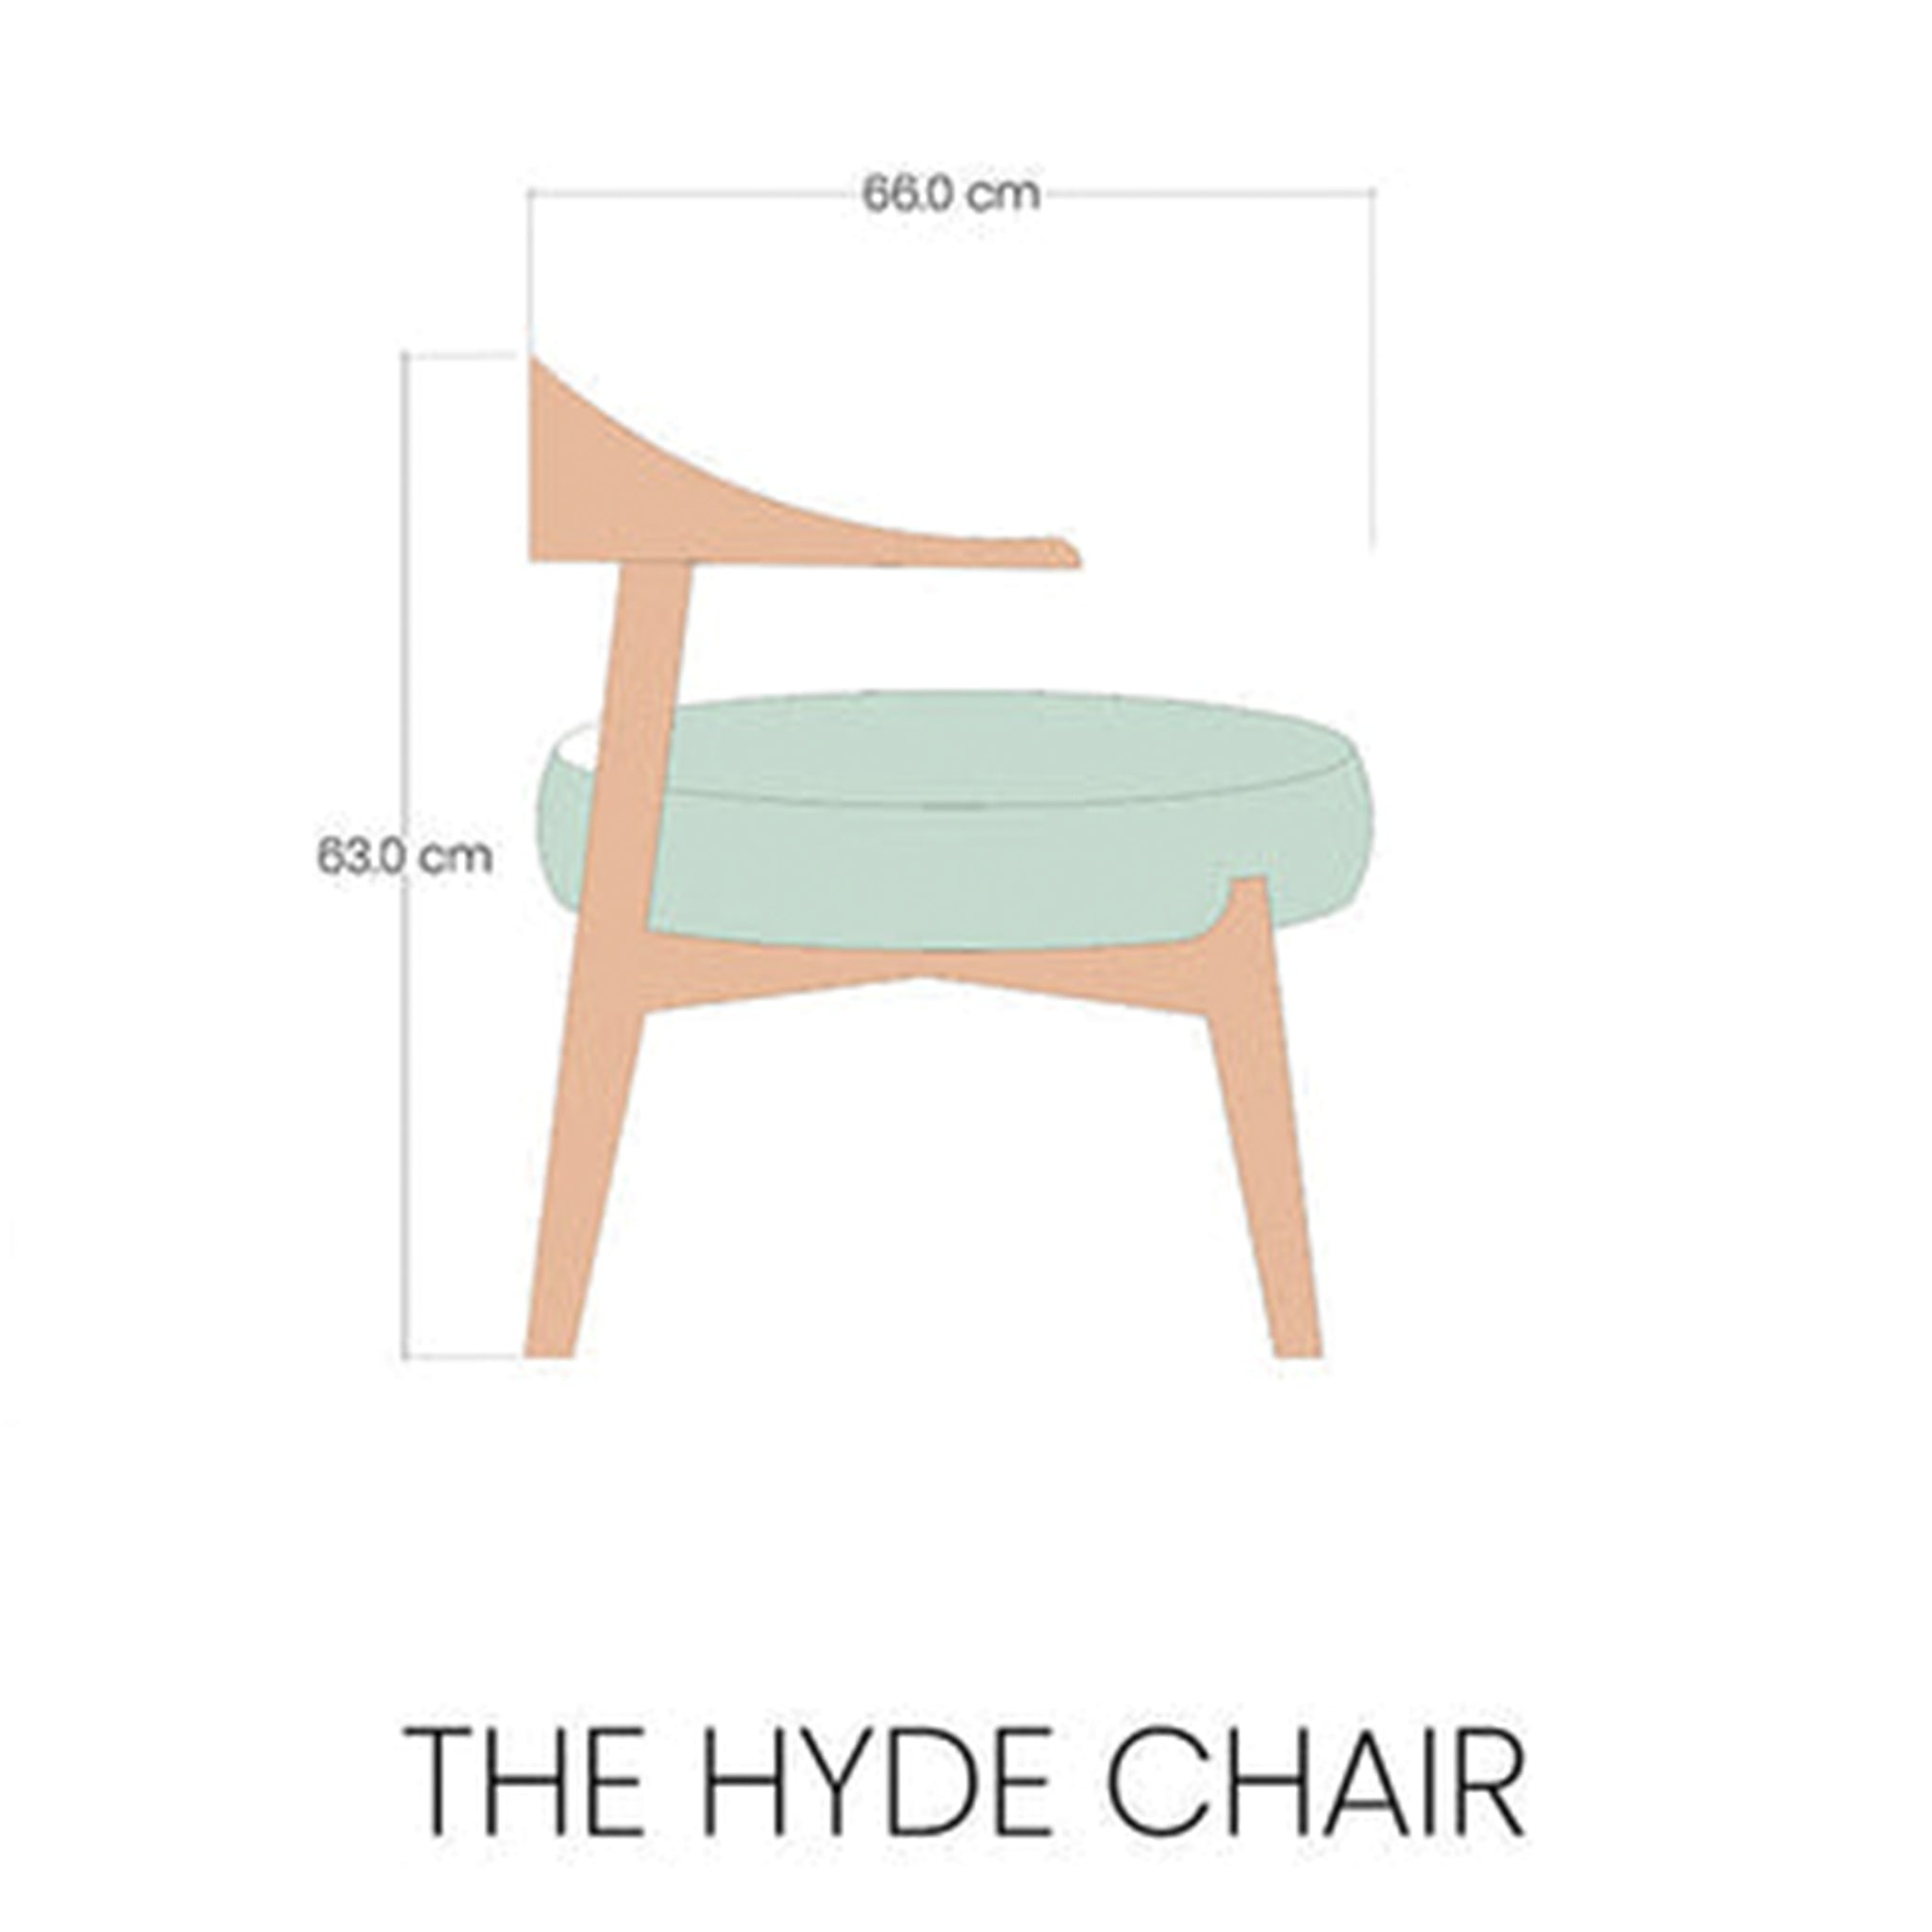 "The Hyde Accent Chair's stylish wooden frame and comfortable fabric seat"